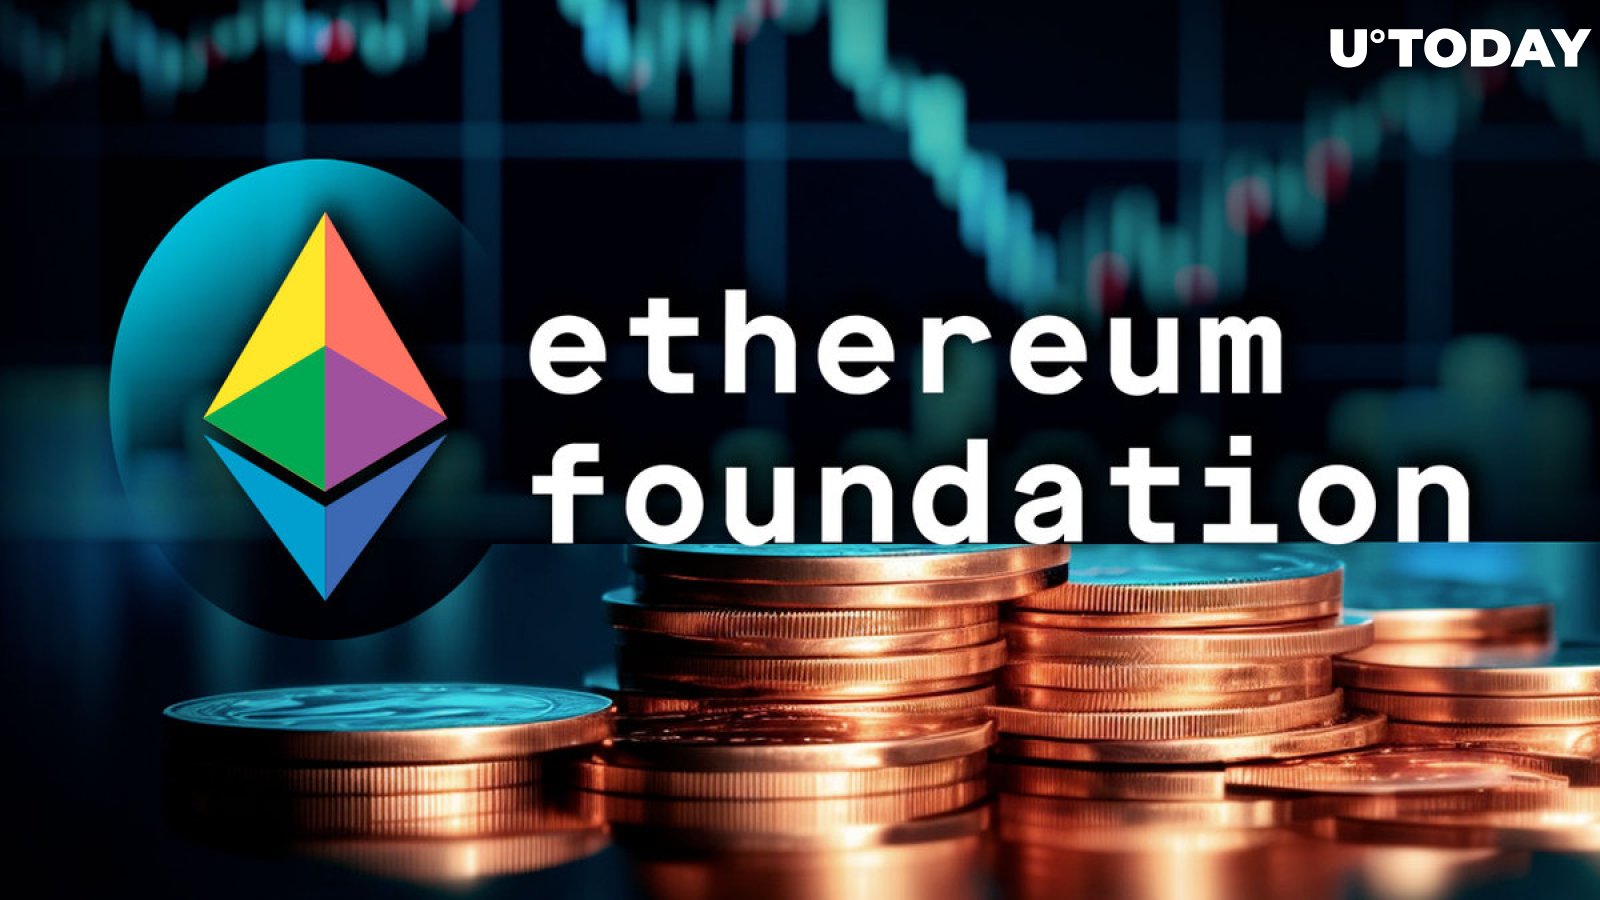 Ethereum Foundation Makes Unexpected $13 Million Move: Is a Dump Coming?